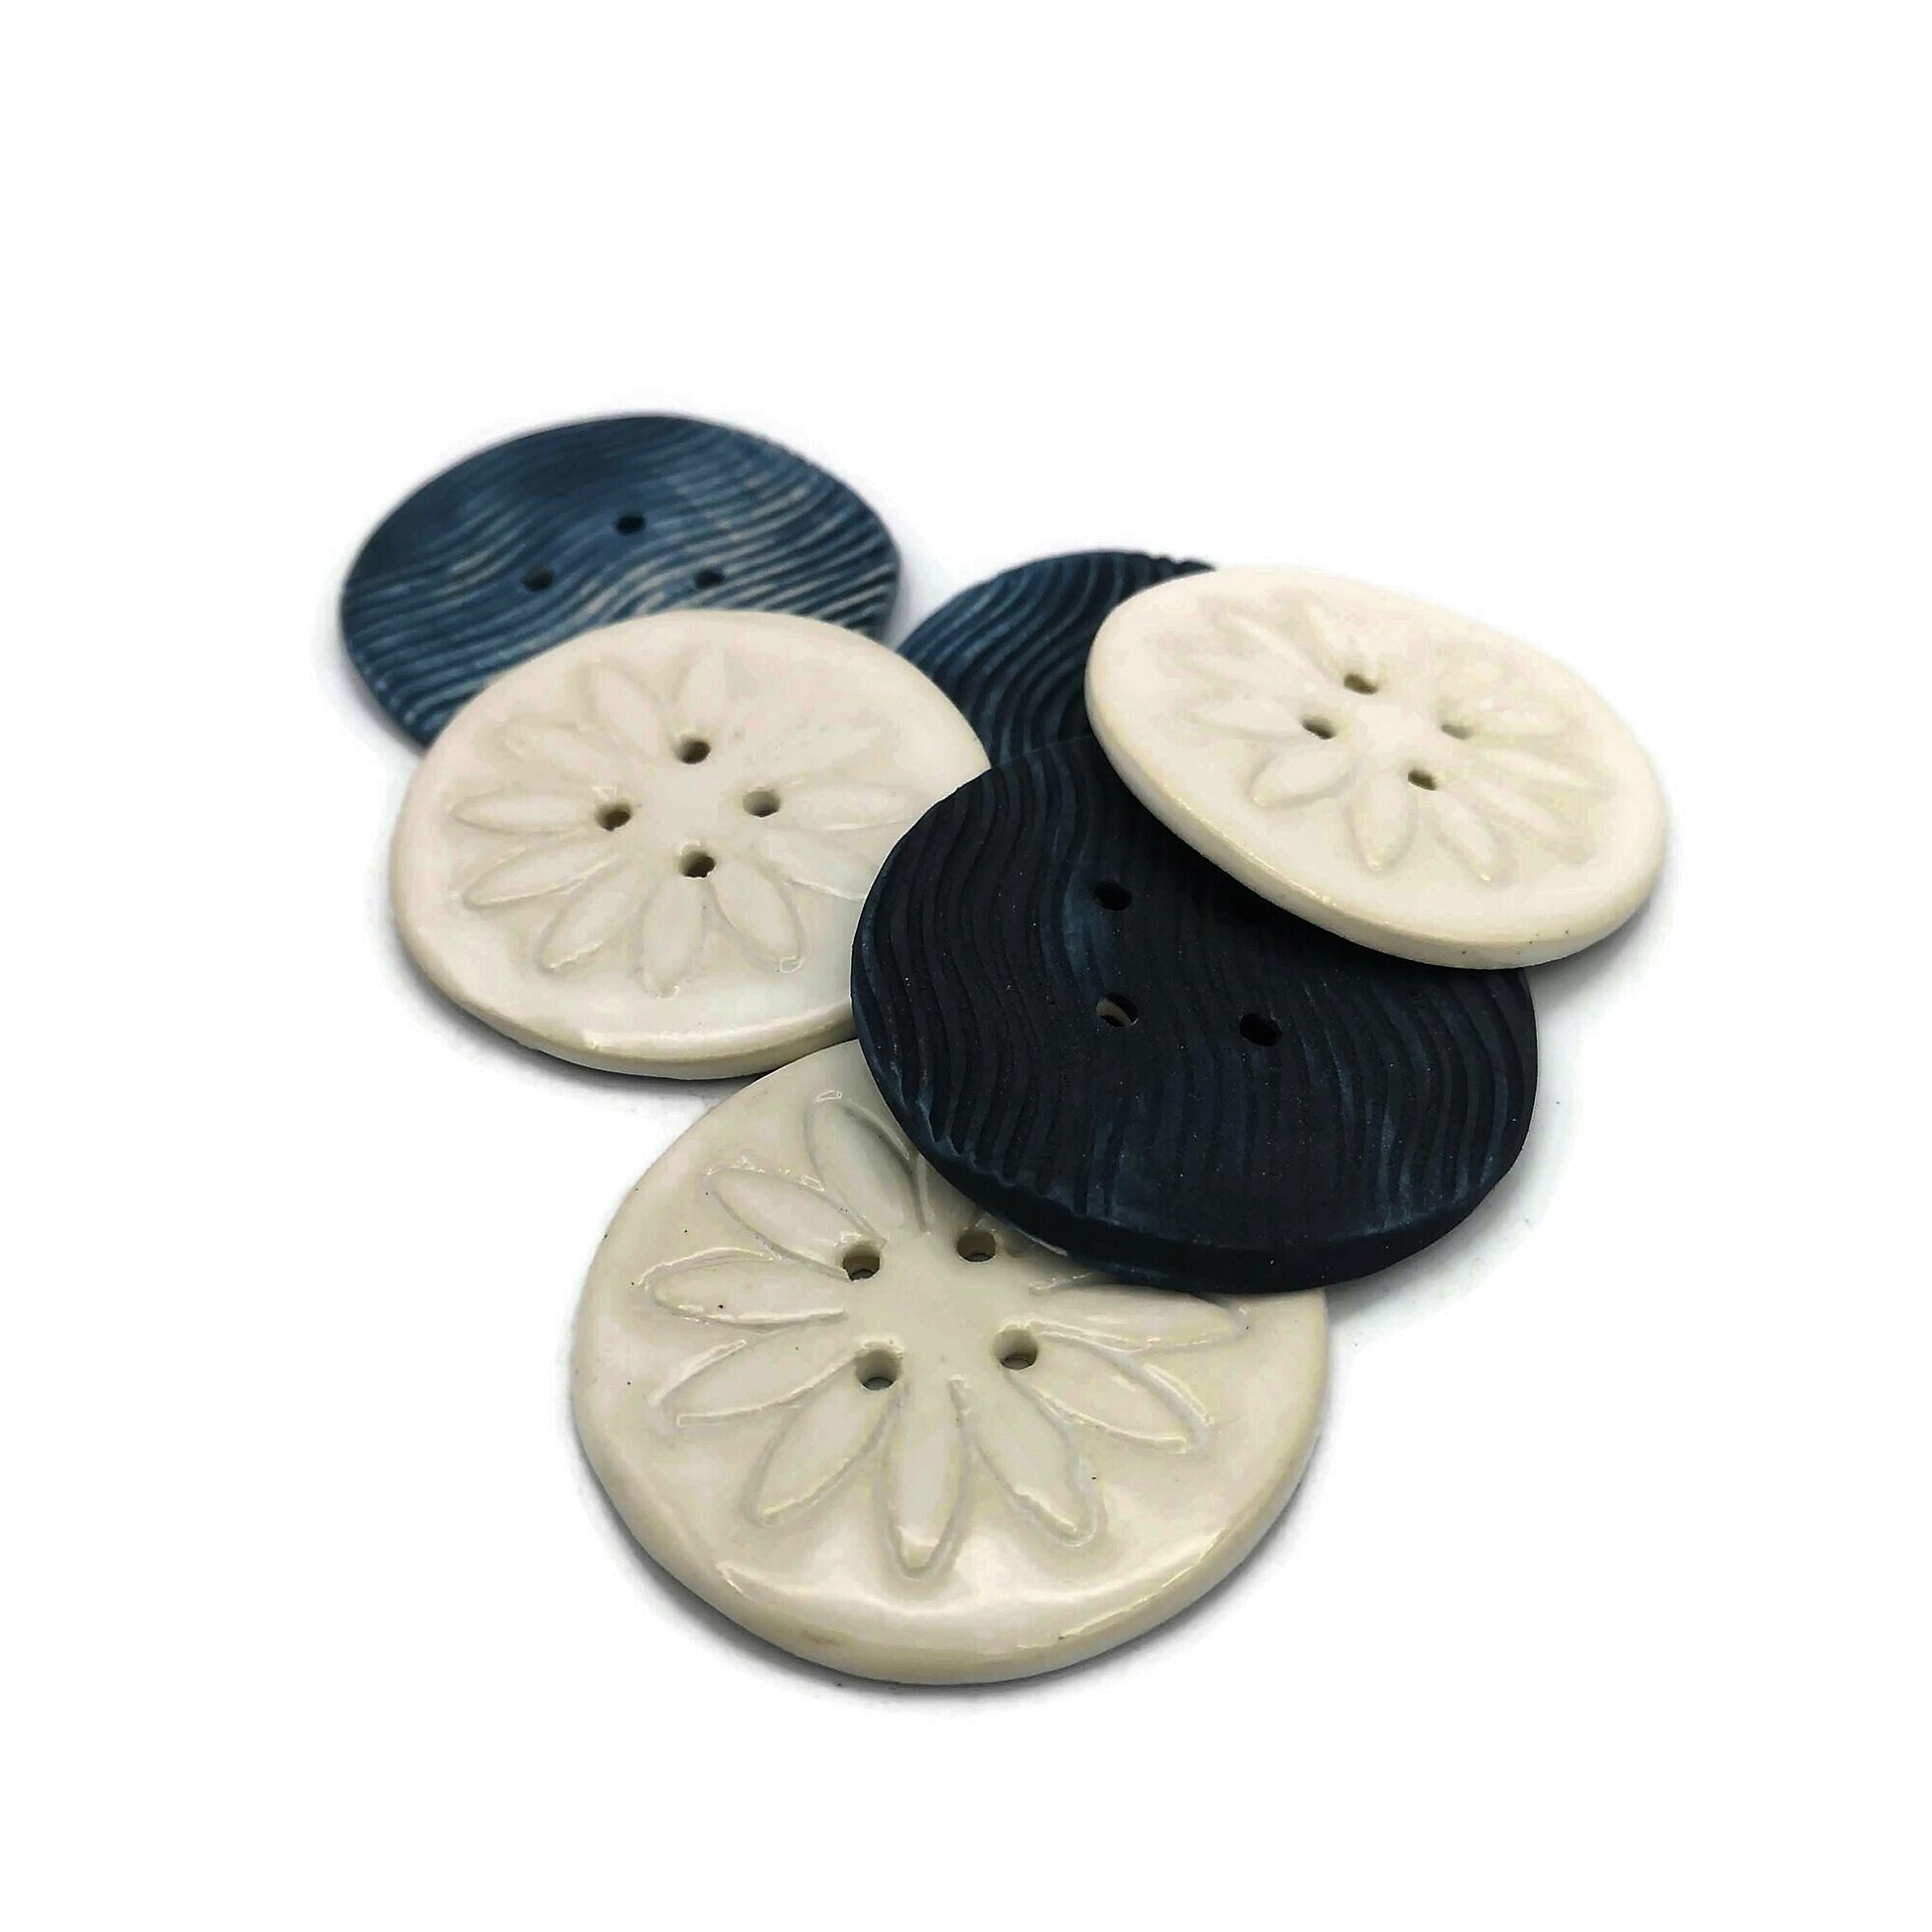 6Pc 65mm Giant Sewing Buttons, Handmade Ceramic Coat Buttons With Flower And Waves Design, Decorative Novelty Buttons for Crafts Extra Large - Ceramica Ana Rafael